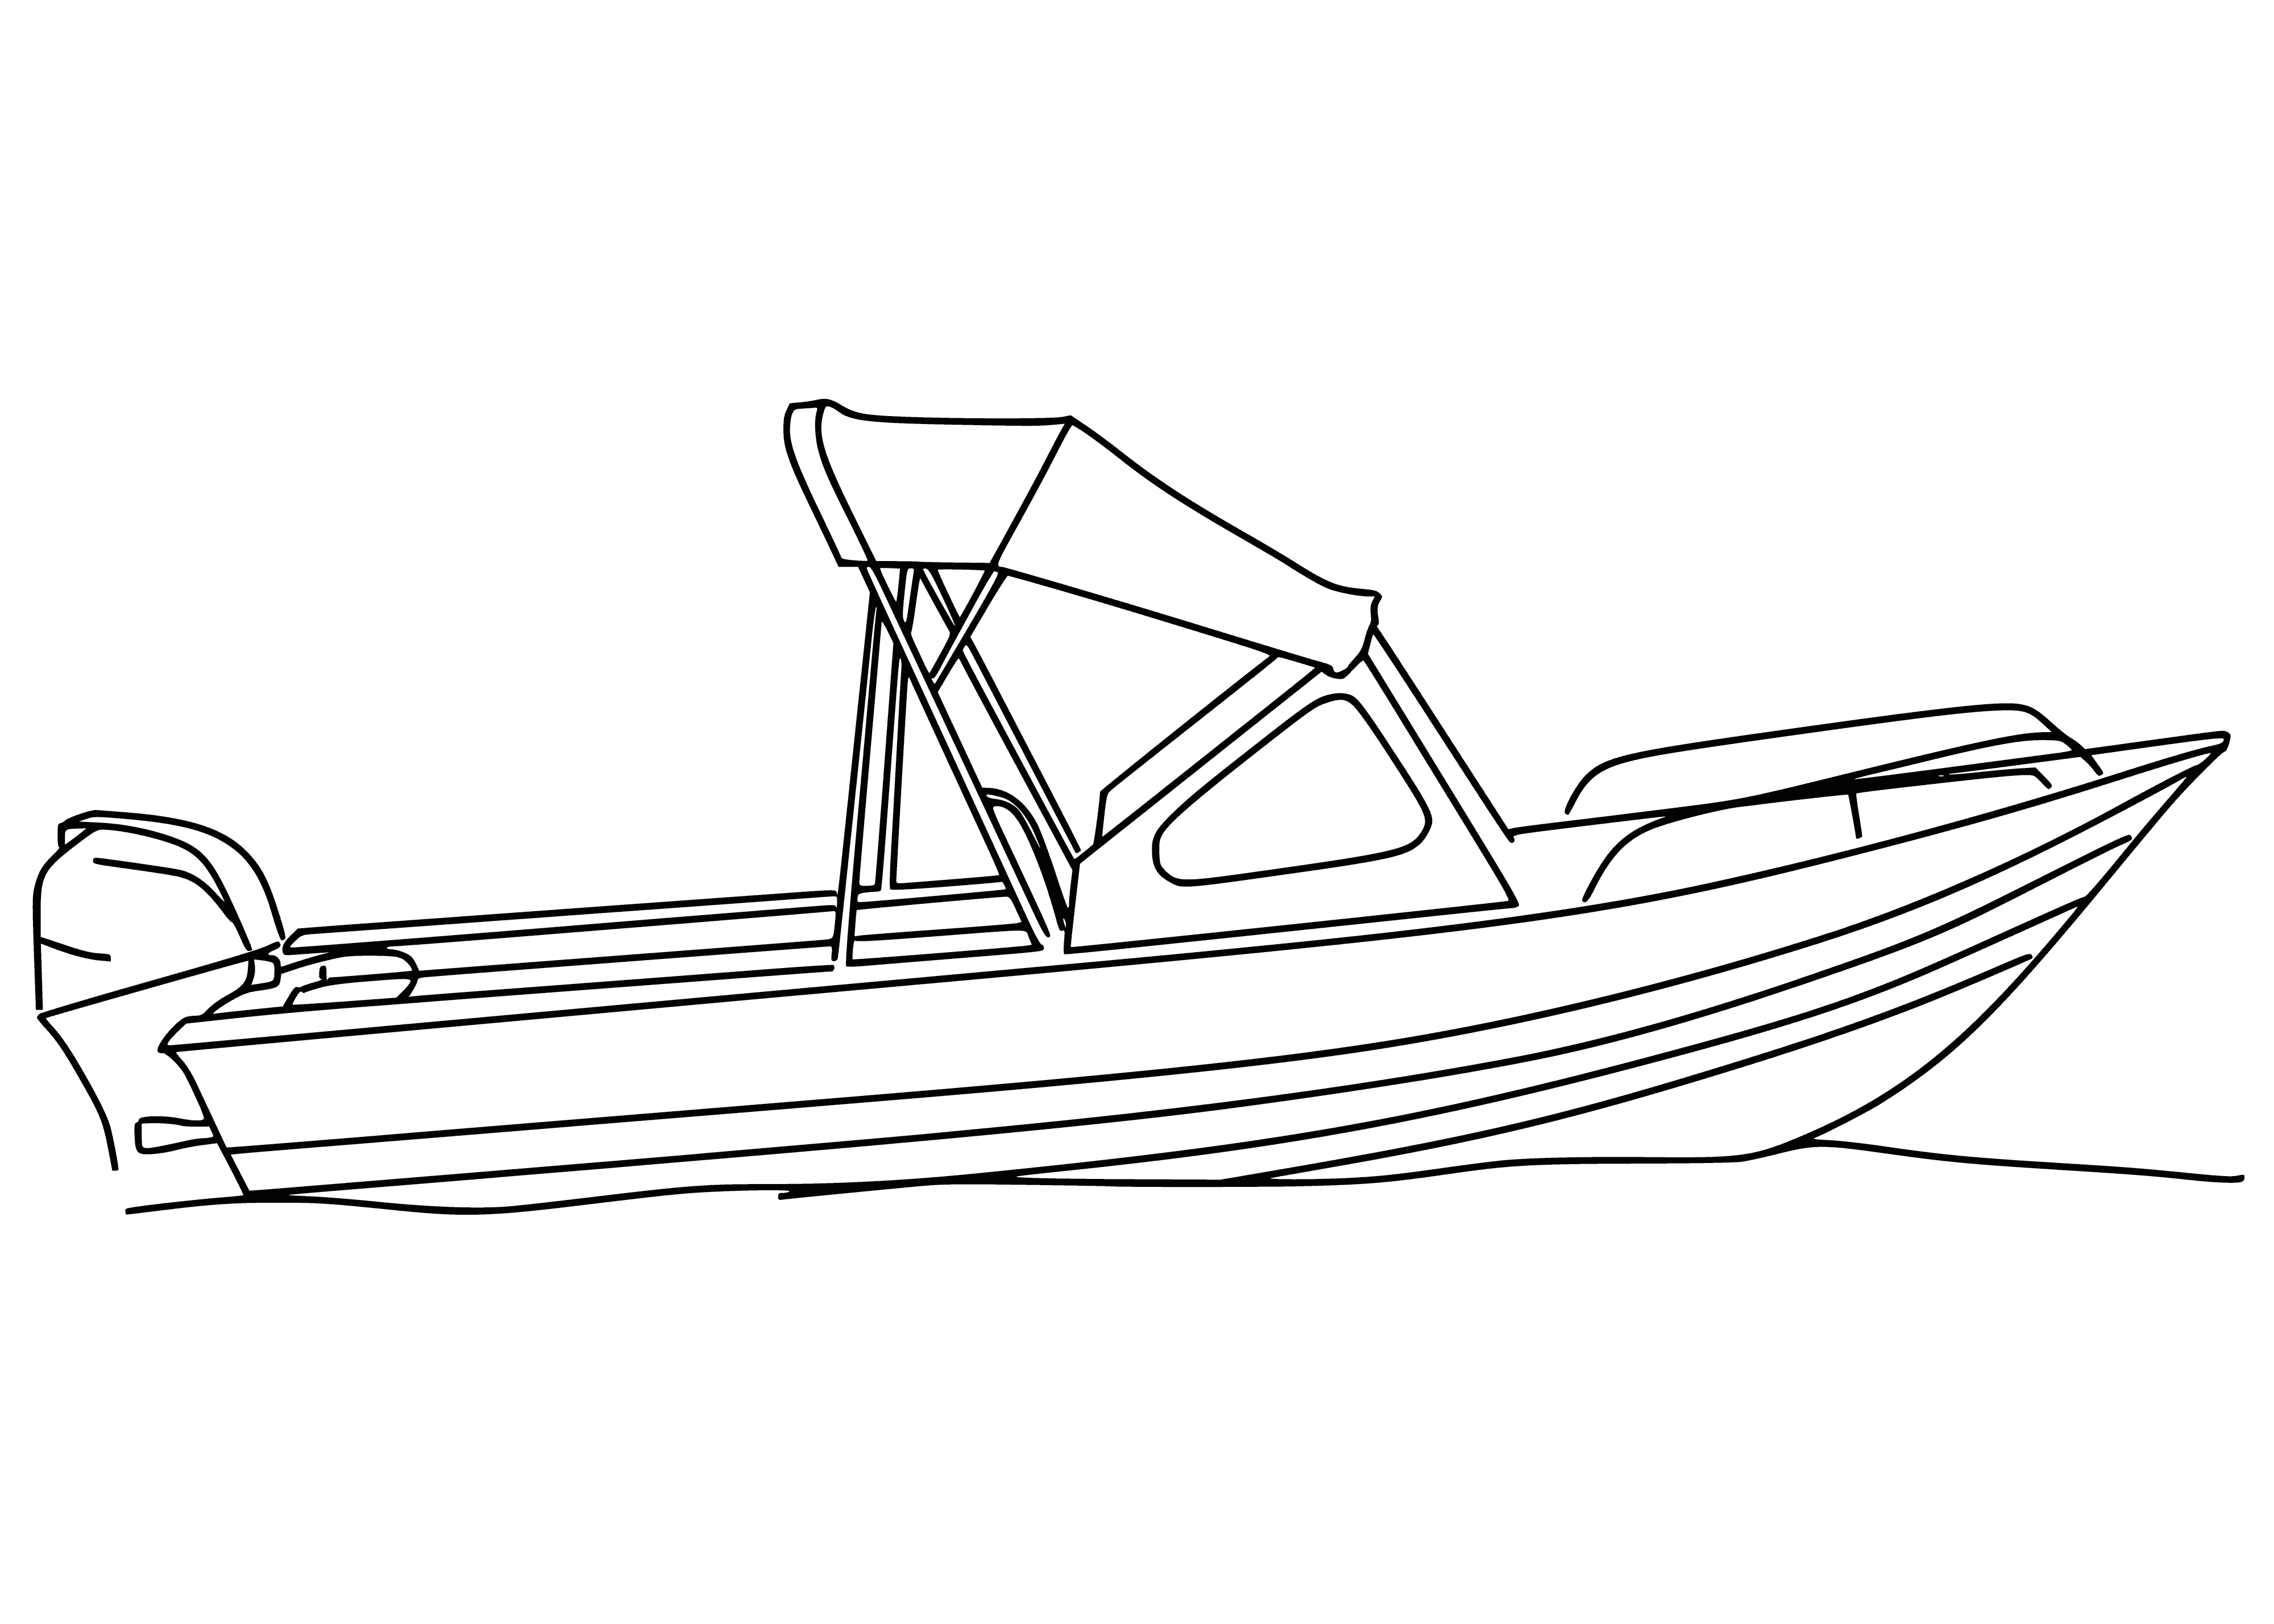 coloring page: A white boat with a tall mast and large rectangular sail races through the water, creating a wake.